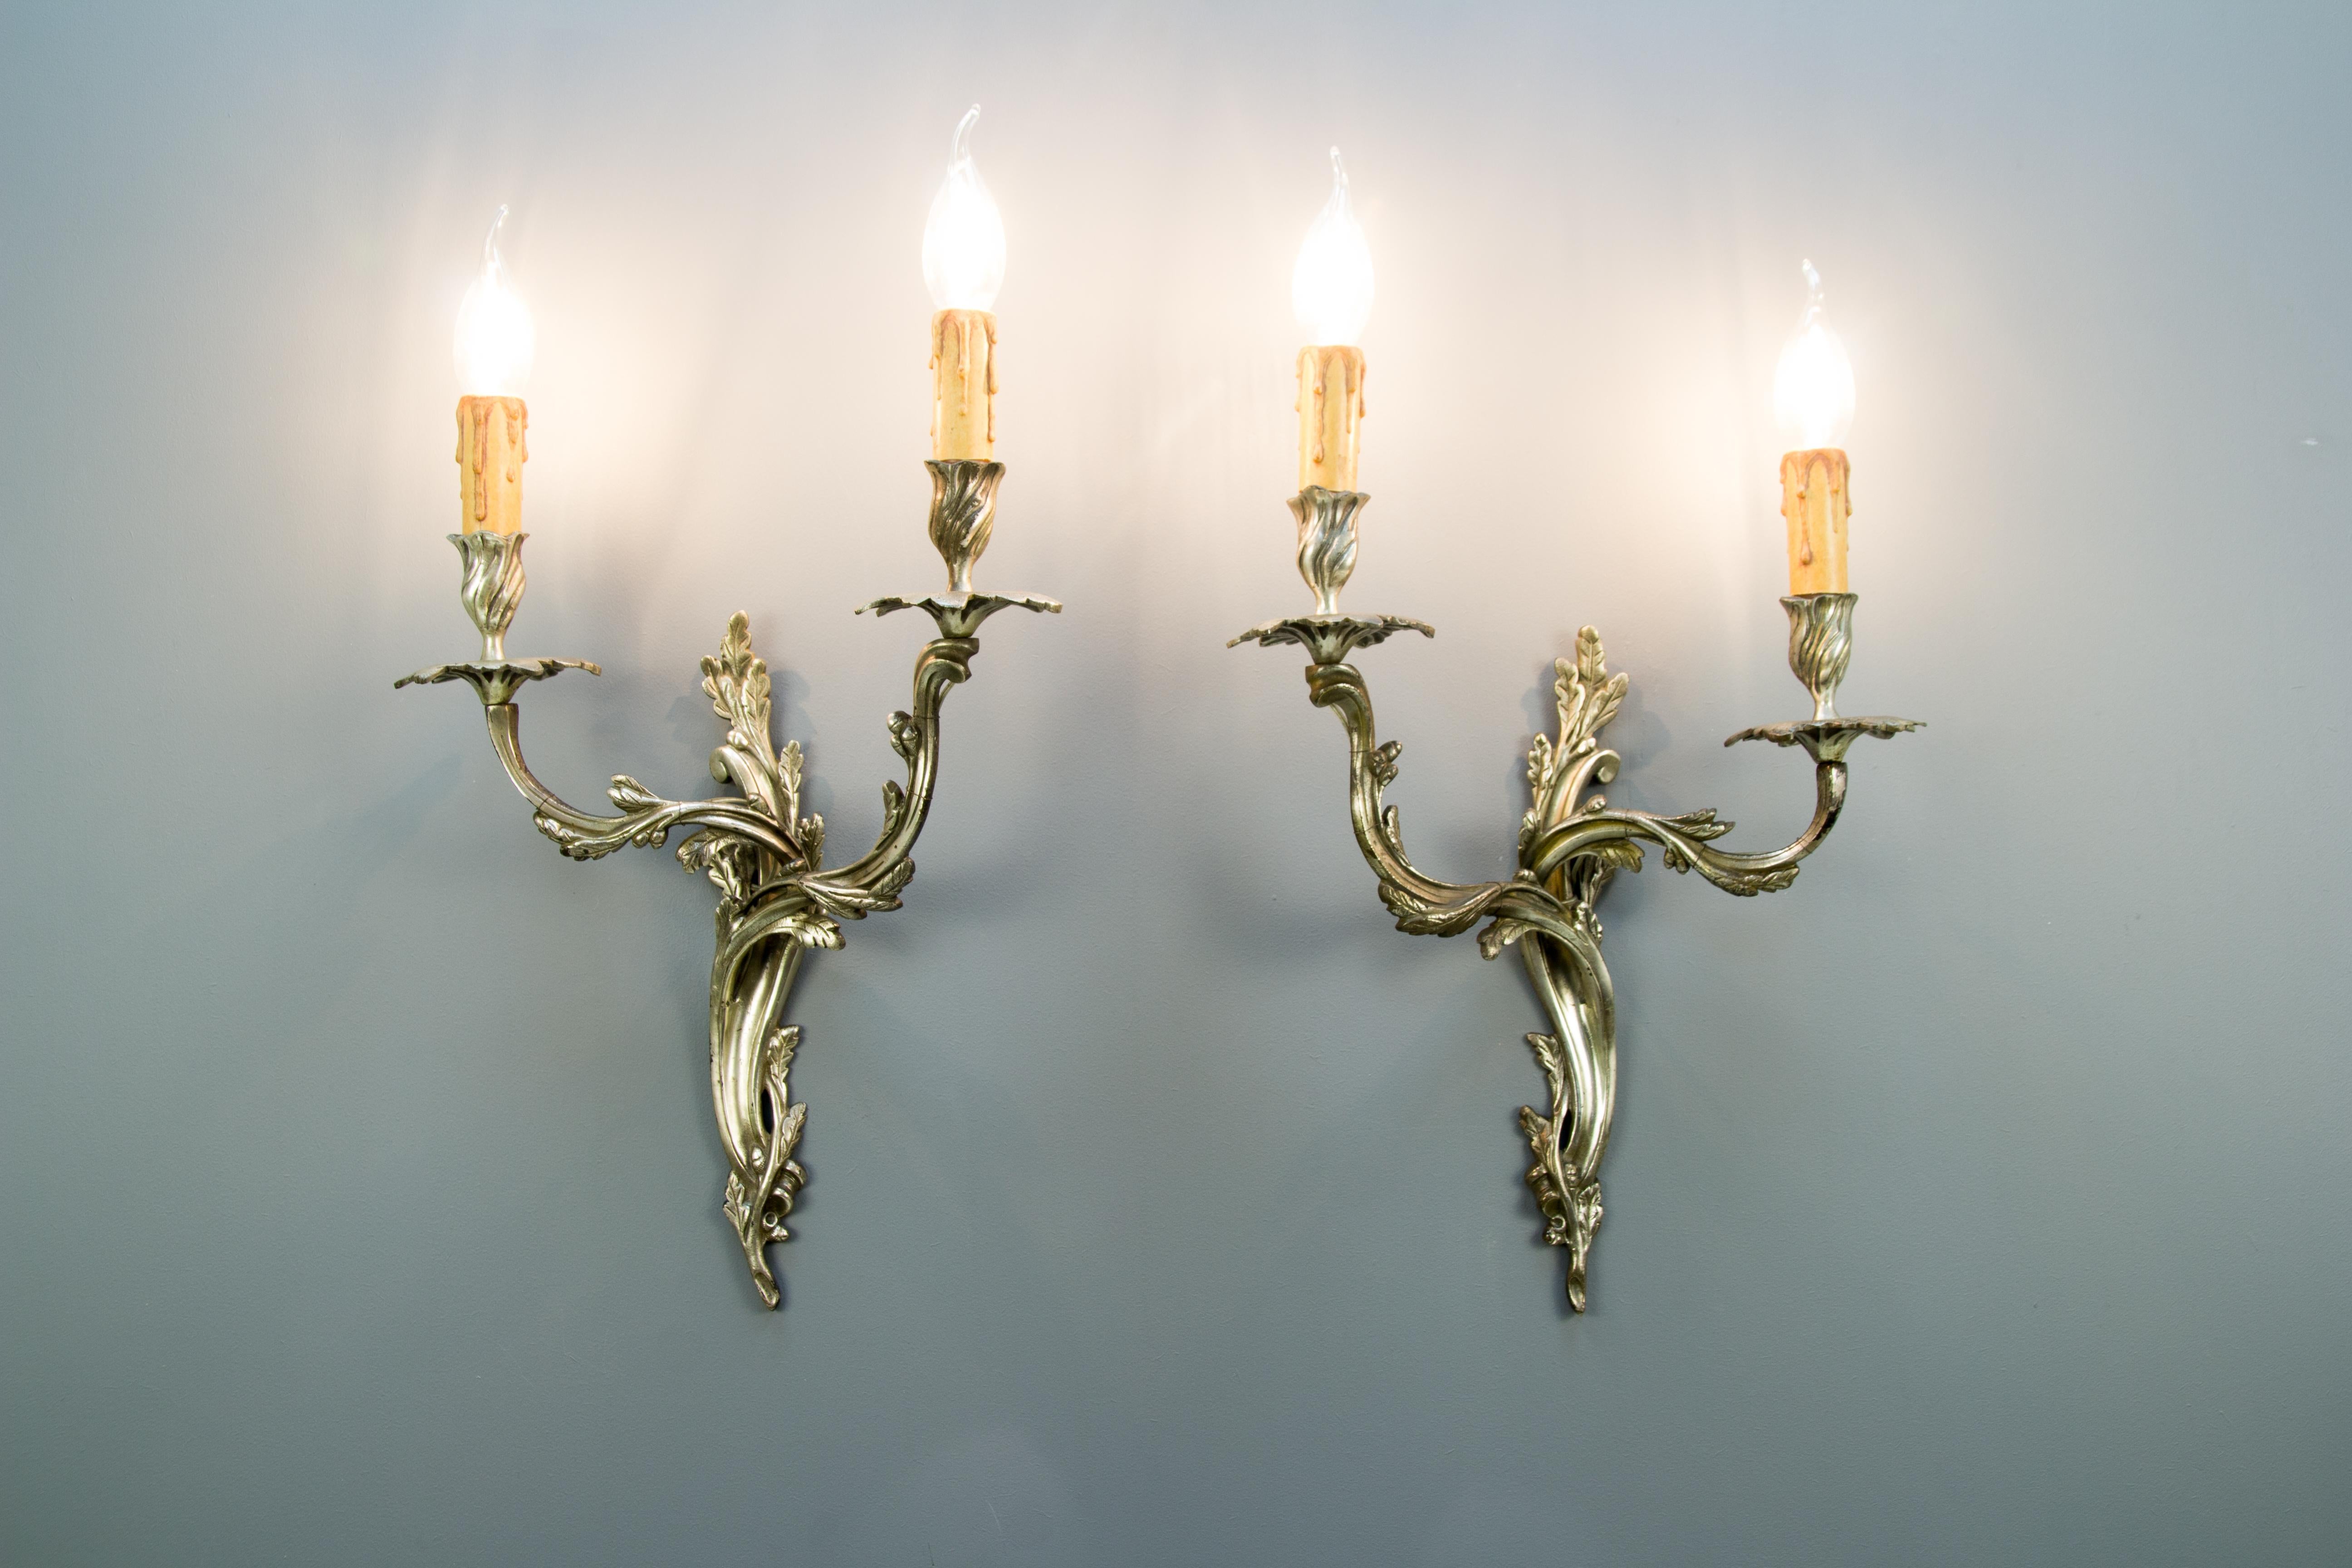 French Rococo or Louis XV style bronze sconces in silver color with ornate scrolled acanthus design. Each sconce has two branches with sockets for E 14 light bulbs.
Dimensions:
Height 40 cm / 15.74 in; width 30 cm / 11.81 in; depth 12 cm / 4.72 in.